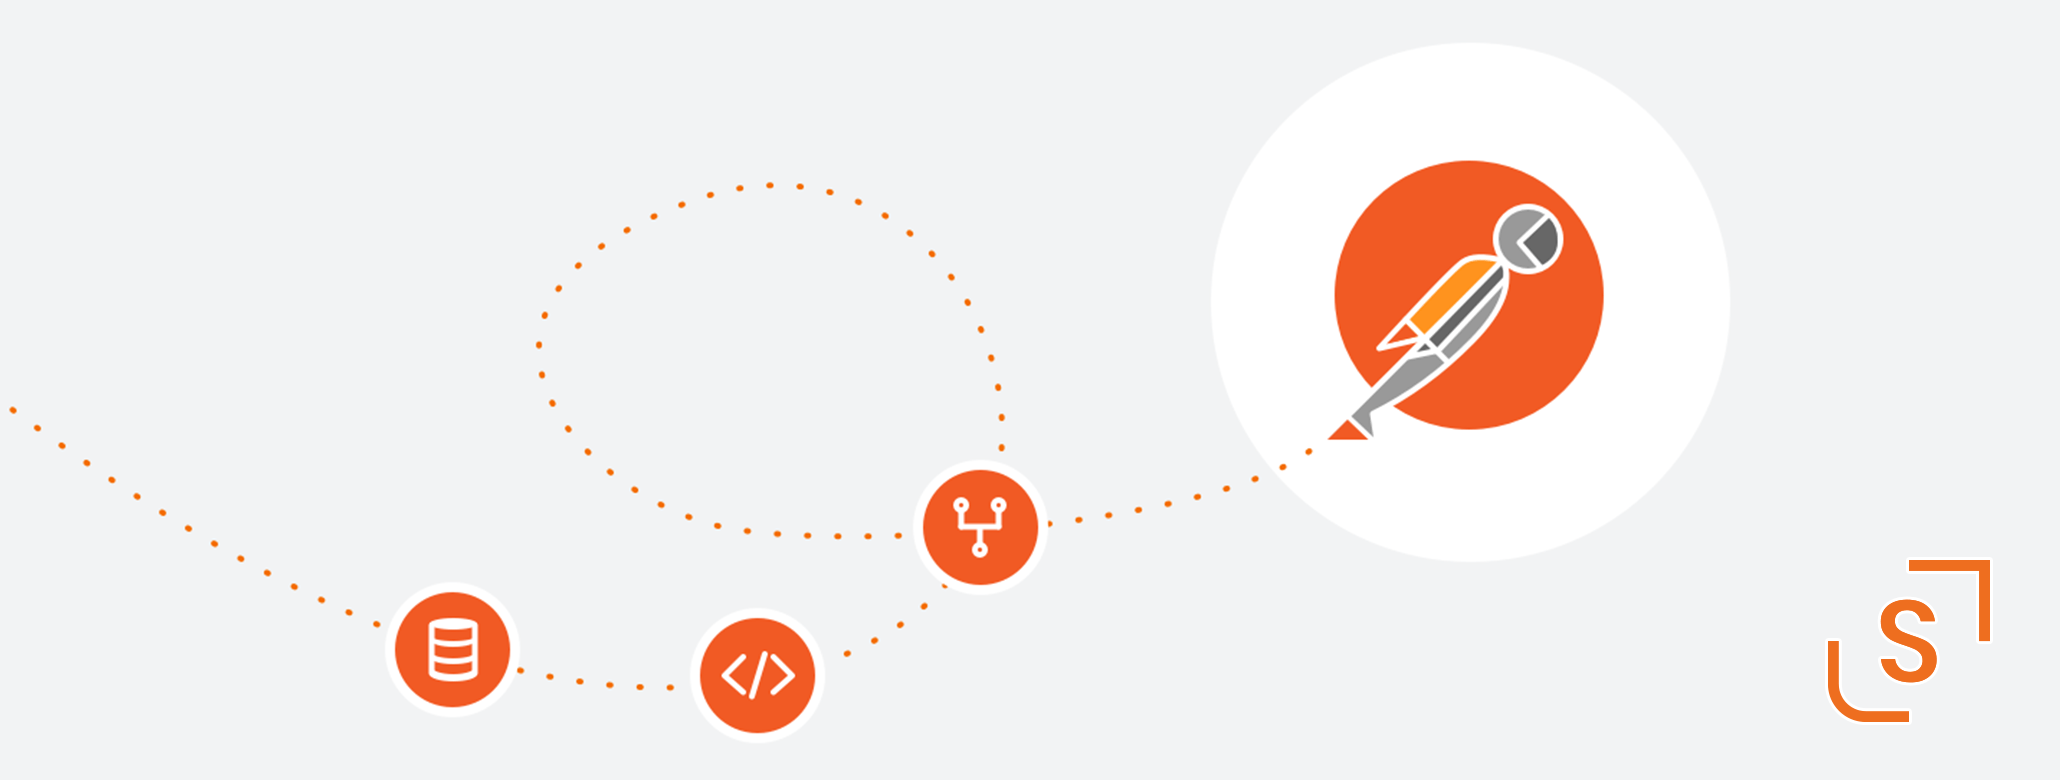 Postman Logo - Ways to use Postman for Better QA Results